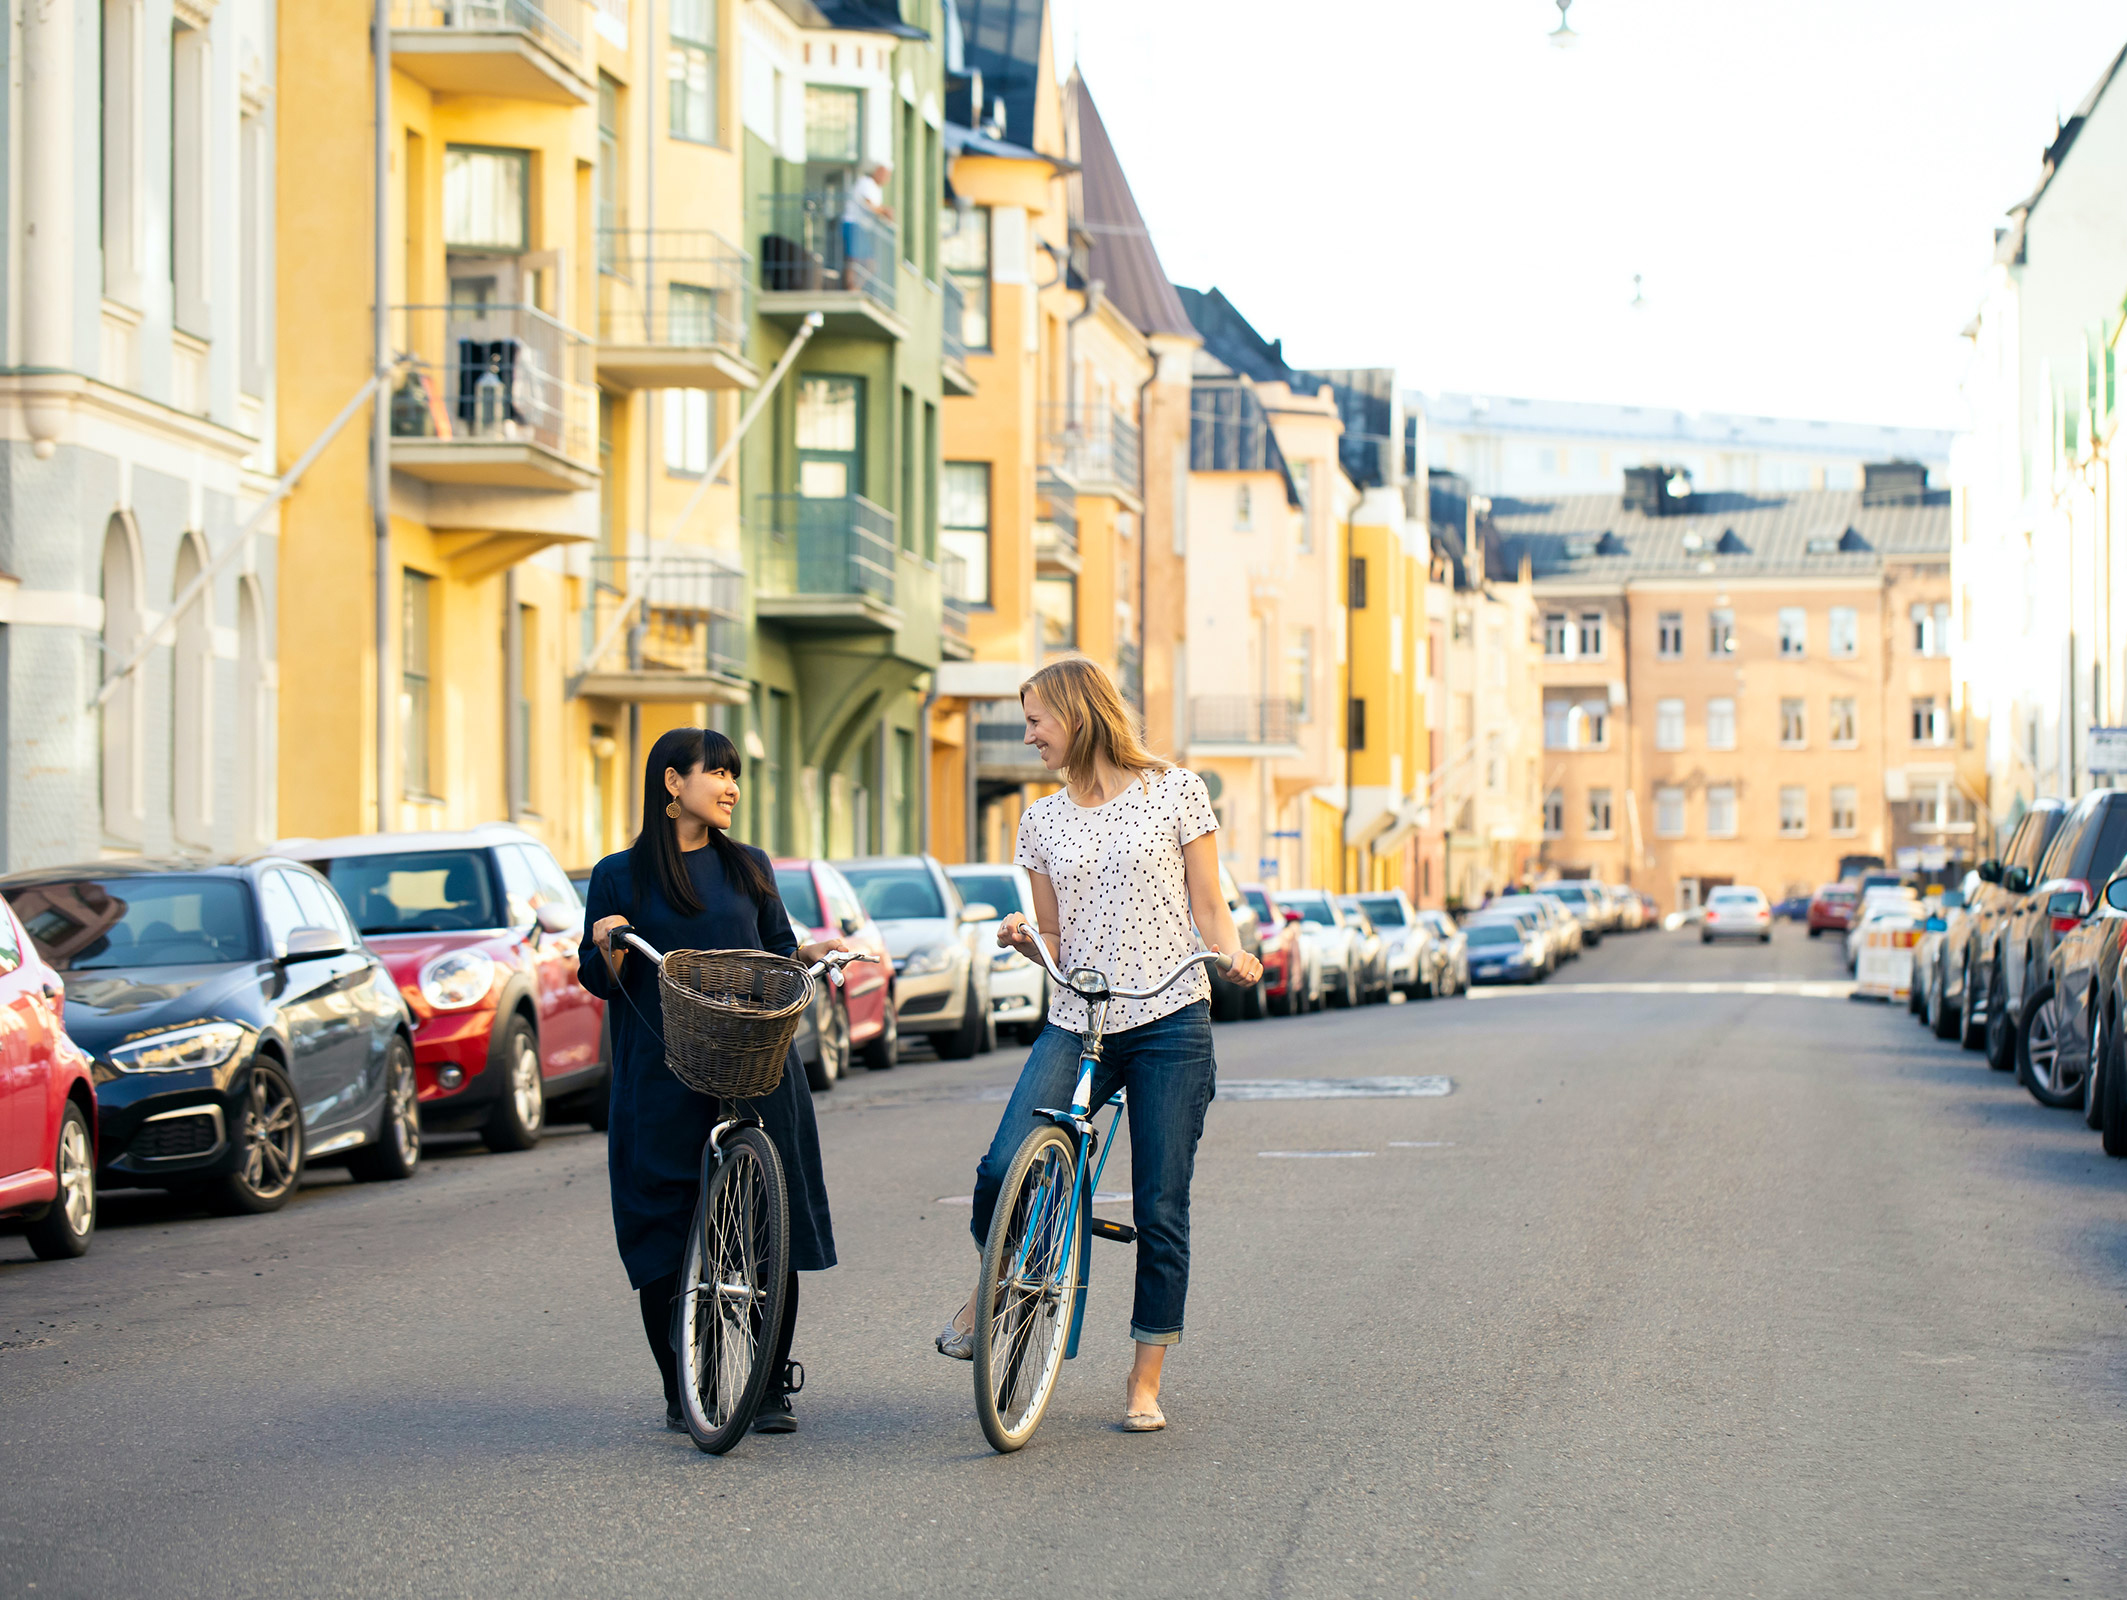 Two people smiling and talking on bikes in the middle of the street in Helsinki Finland